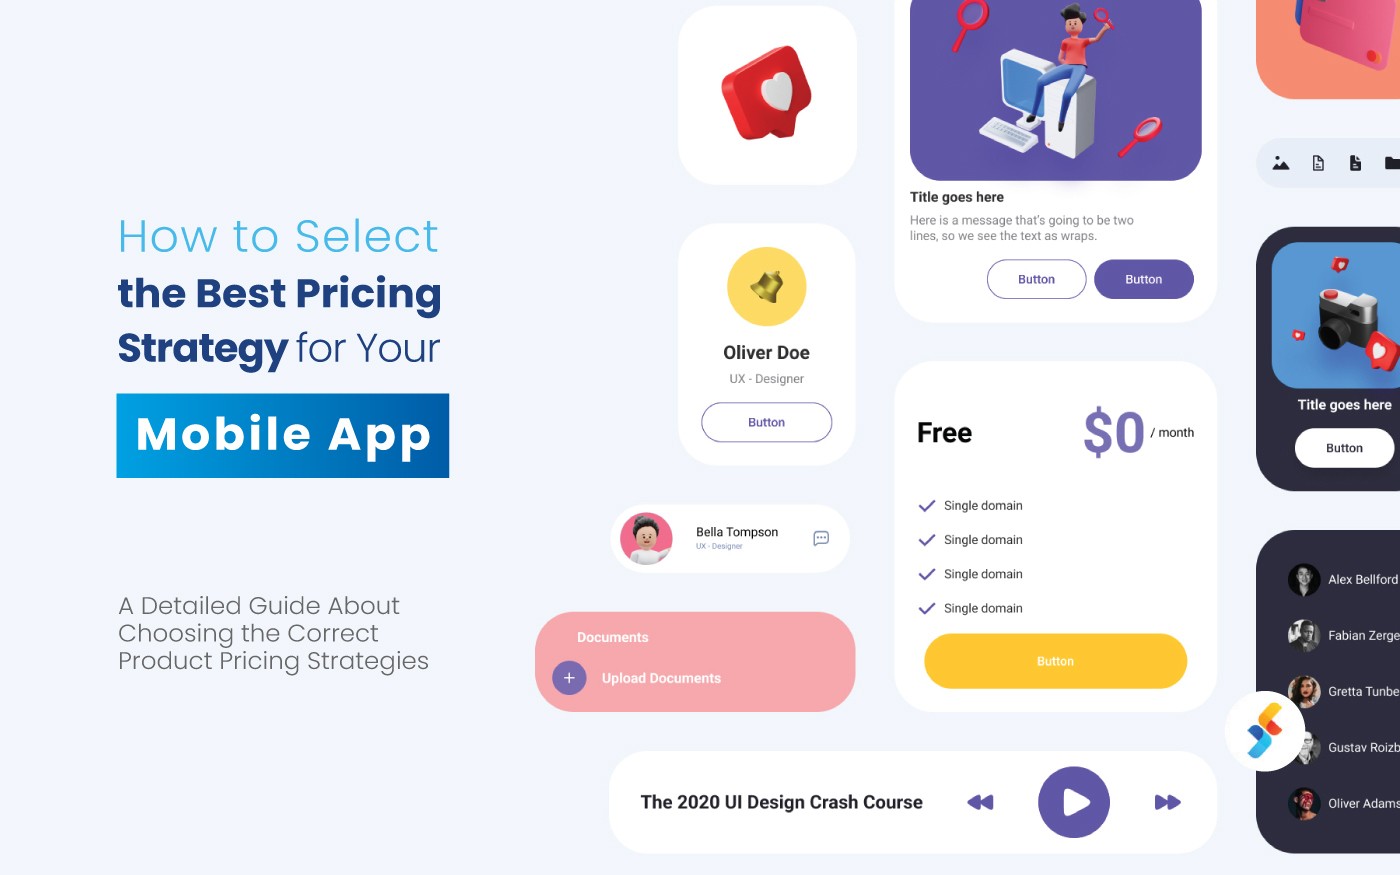 How to Select the Best Pricing Strategy for Your Mobile App